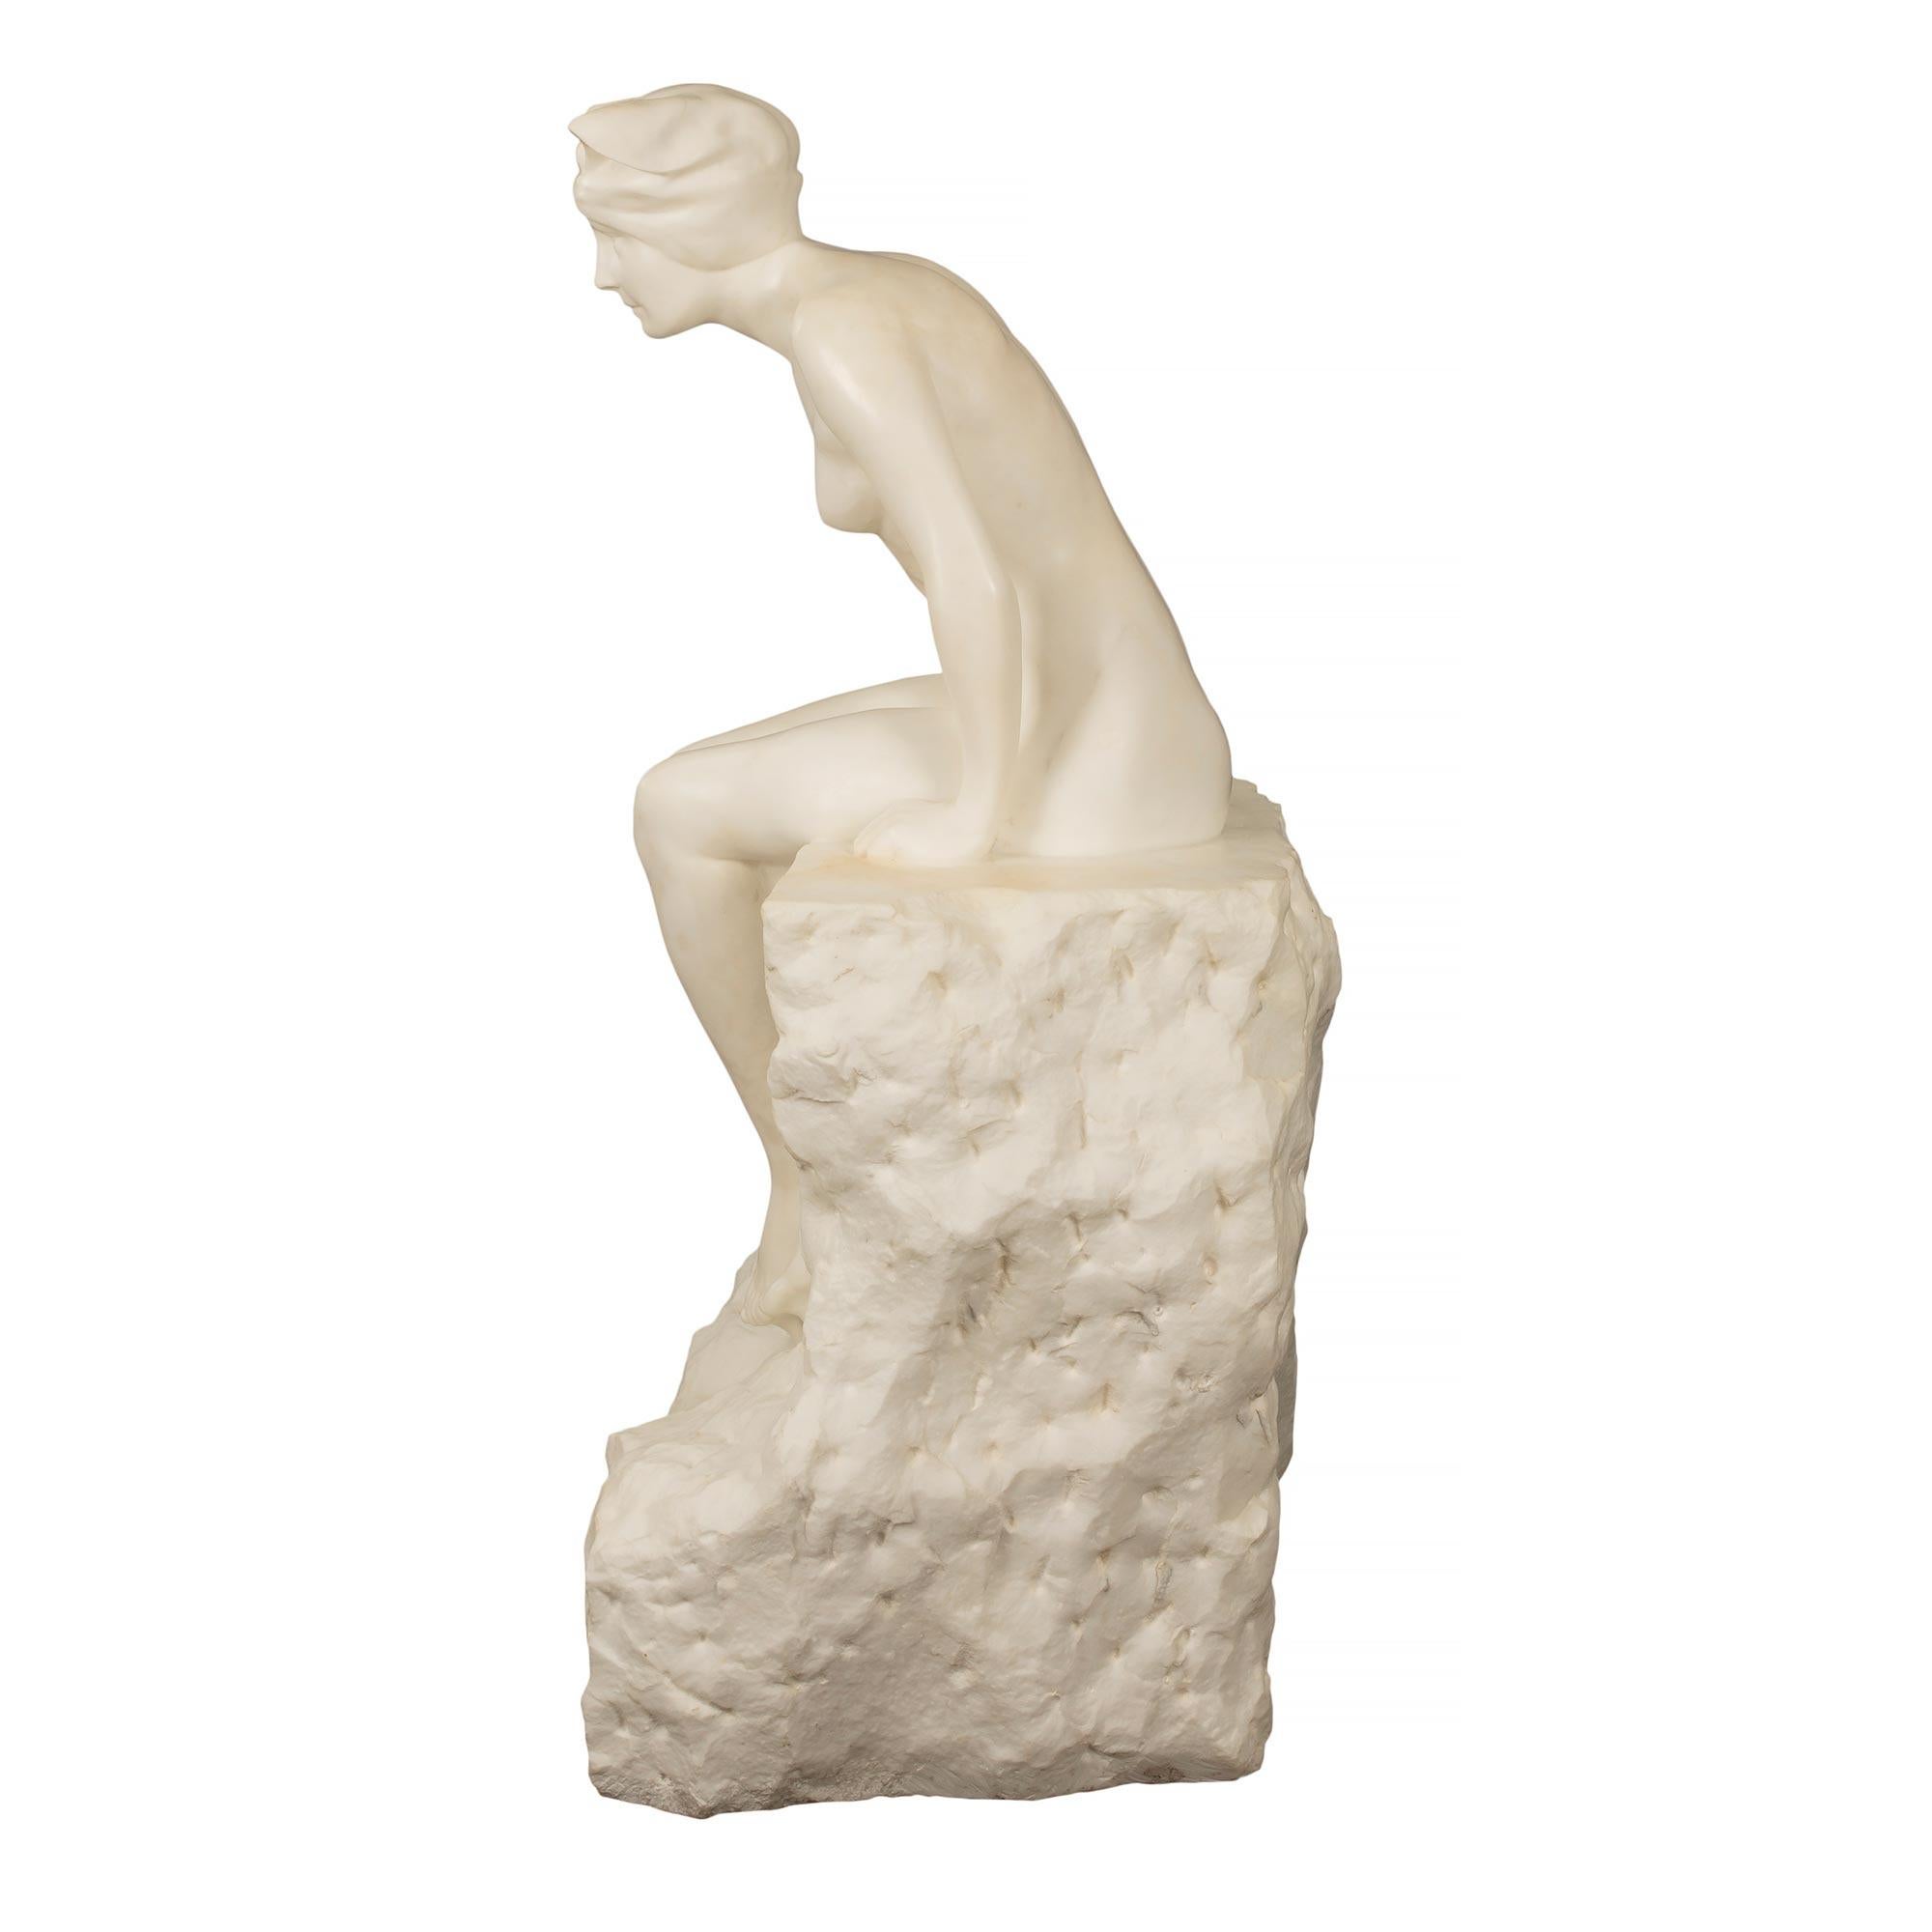 Italian 19th Century White Carrara Marble Statue of a Maiden Sitting on a Rock For Sale 2